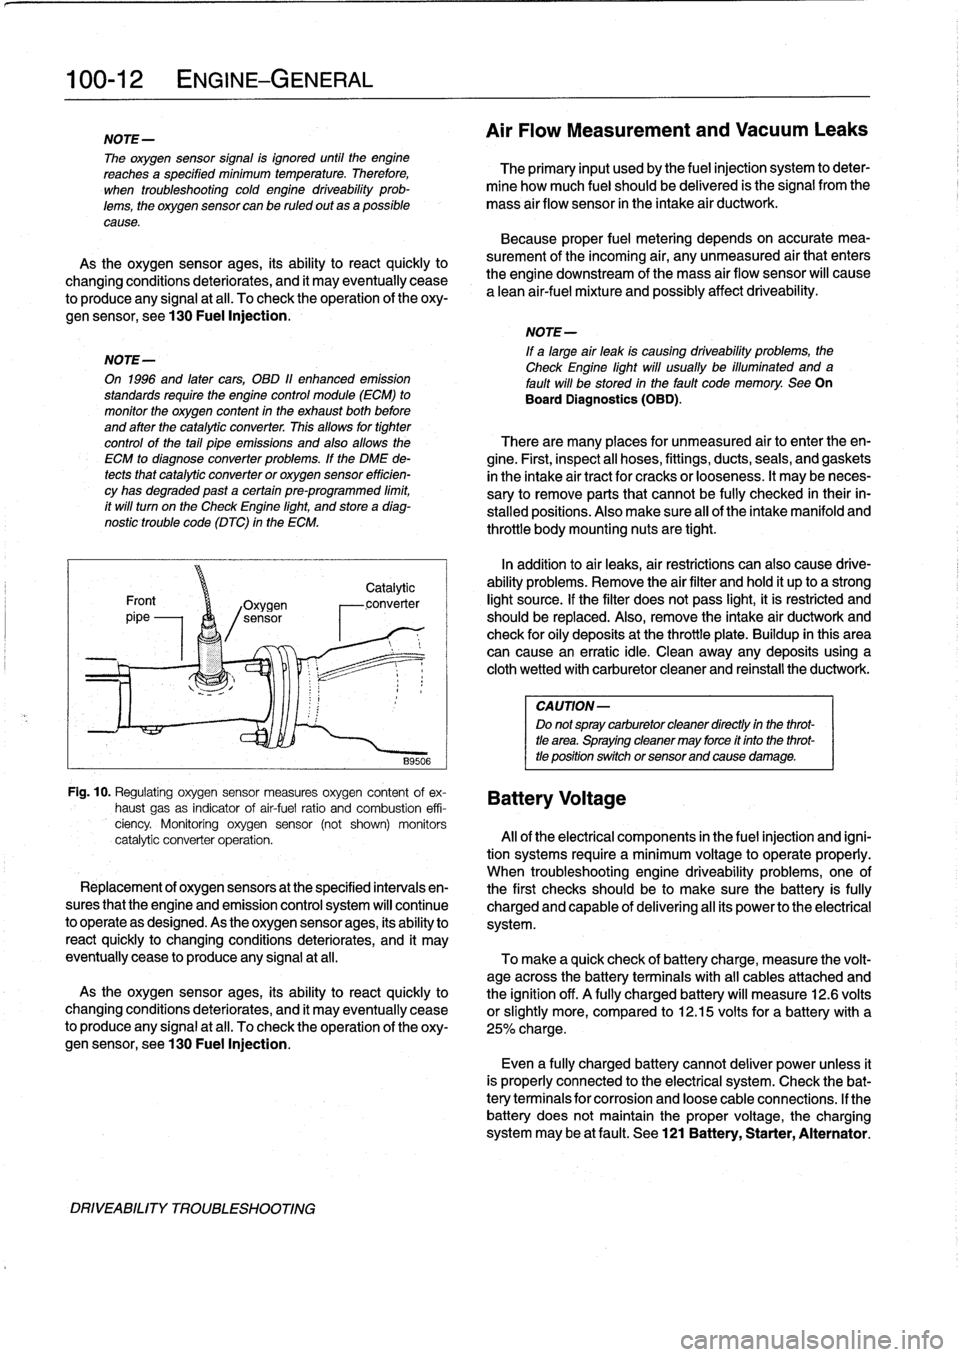 BMW 328i 1994 E36 Workshop Manual 
100-
1
2
ENGINE-GENERAL

NOTE-

The
oxygen
sensor
signal
is
ignored
until
the
engine
reachesa
specified
minimum
temperature
.
Therefore,

	

The
primary
input
usedby
the
fuel
injection
system
to
dete